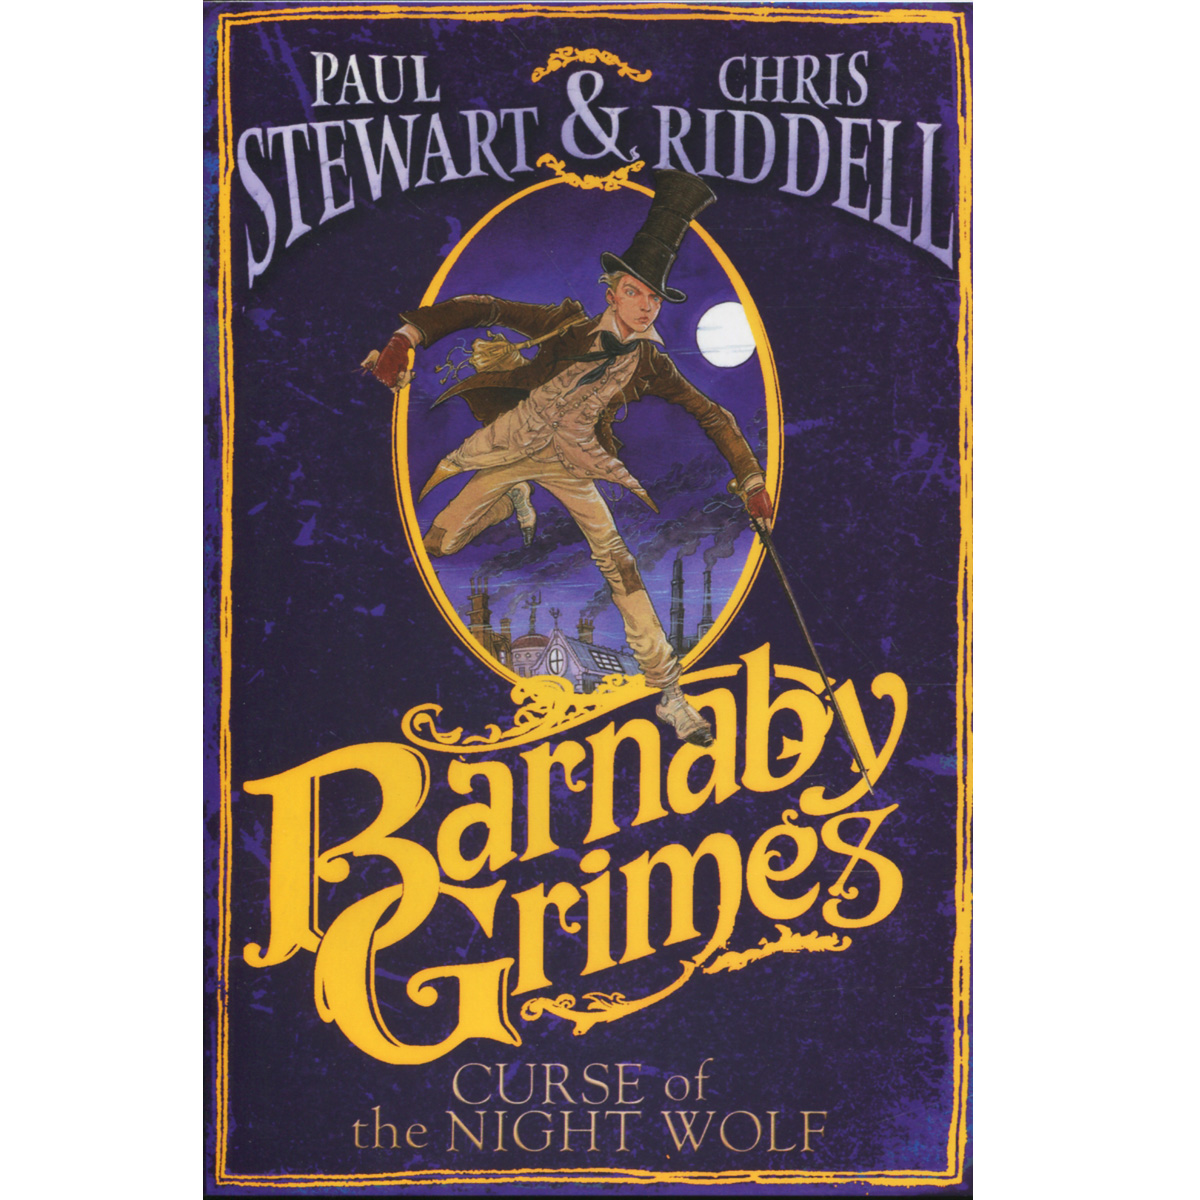 Barnaby Grimes: Curse of the Nightwolf